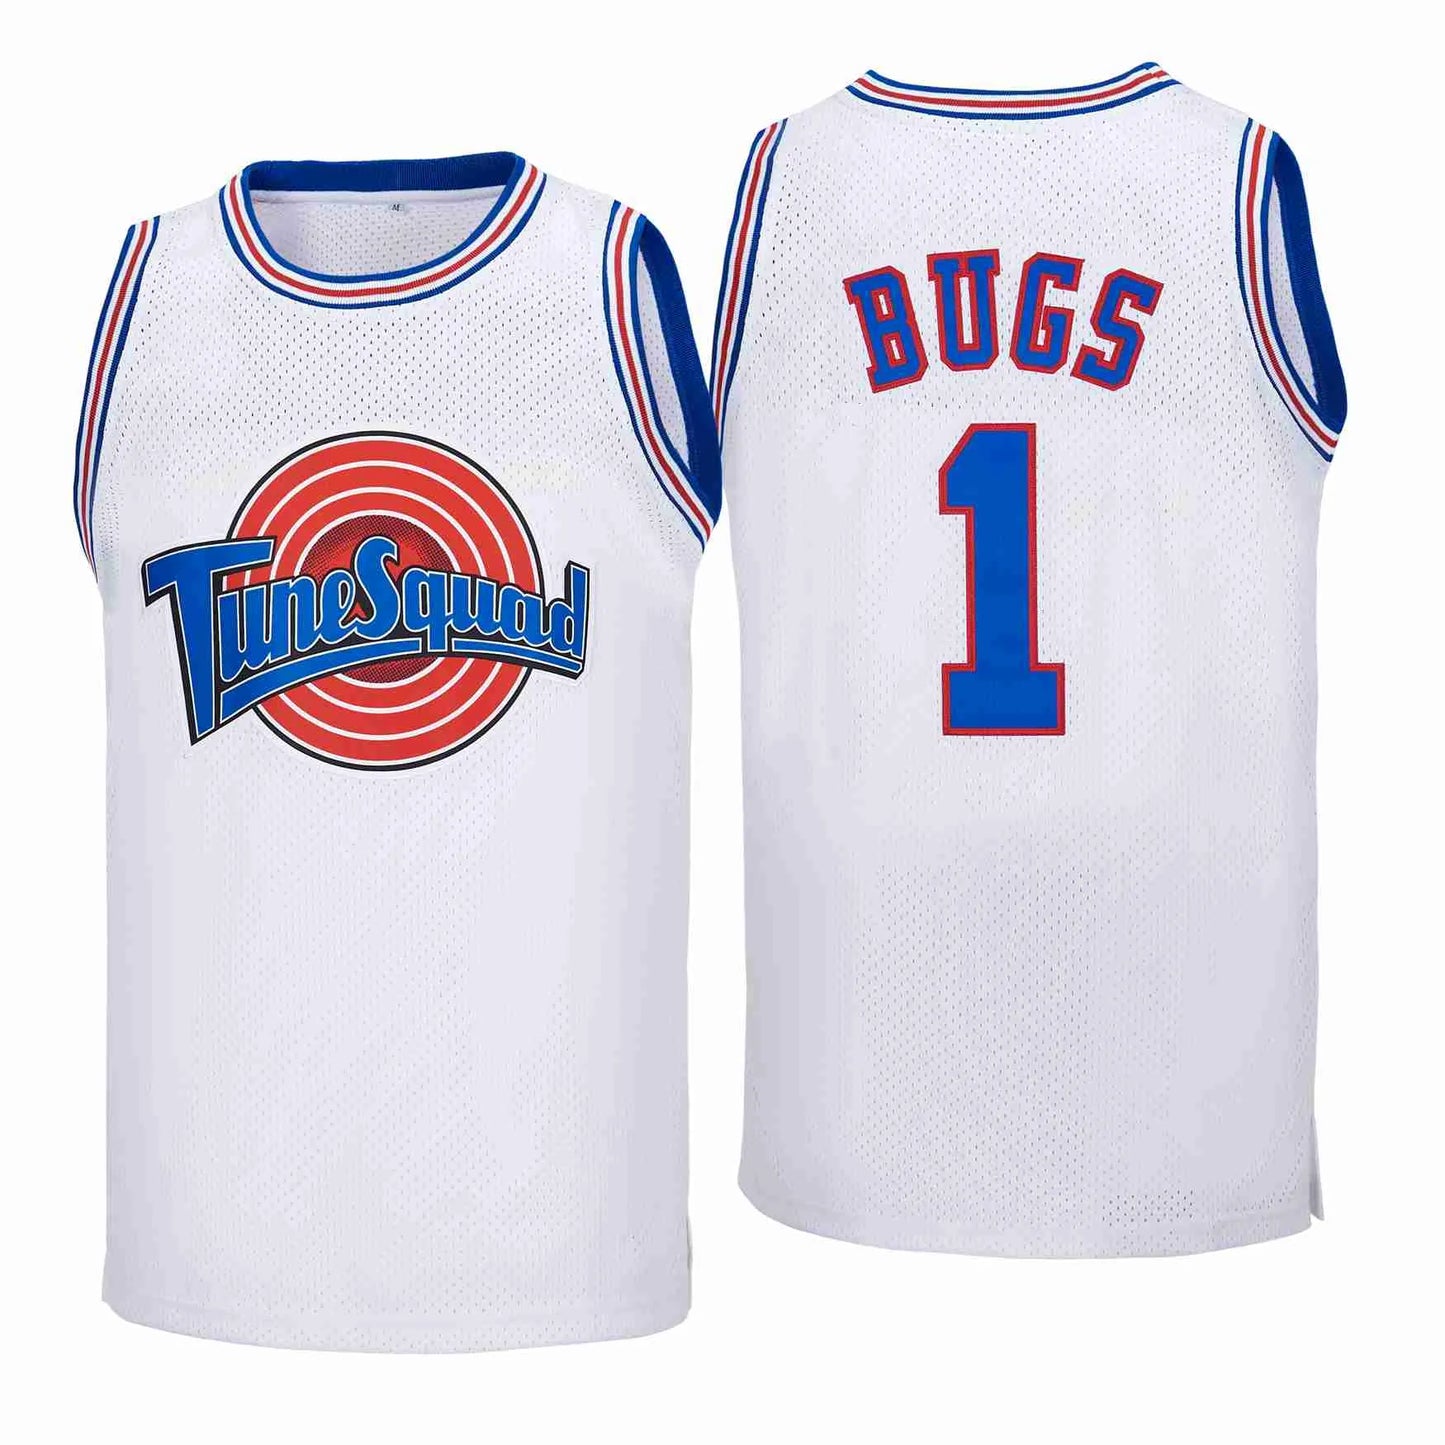 Bugs/Lola Tune Squad Space Jam Jersey